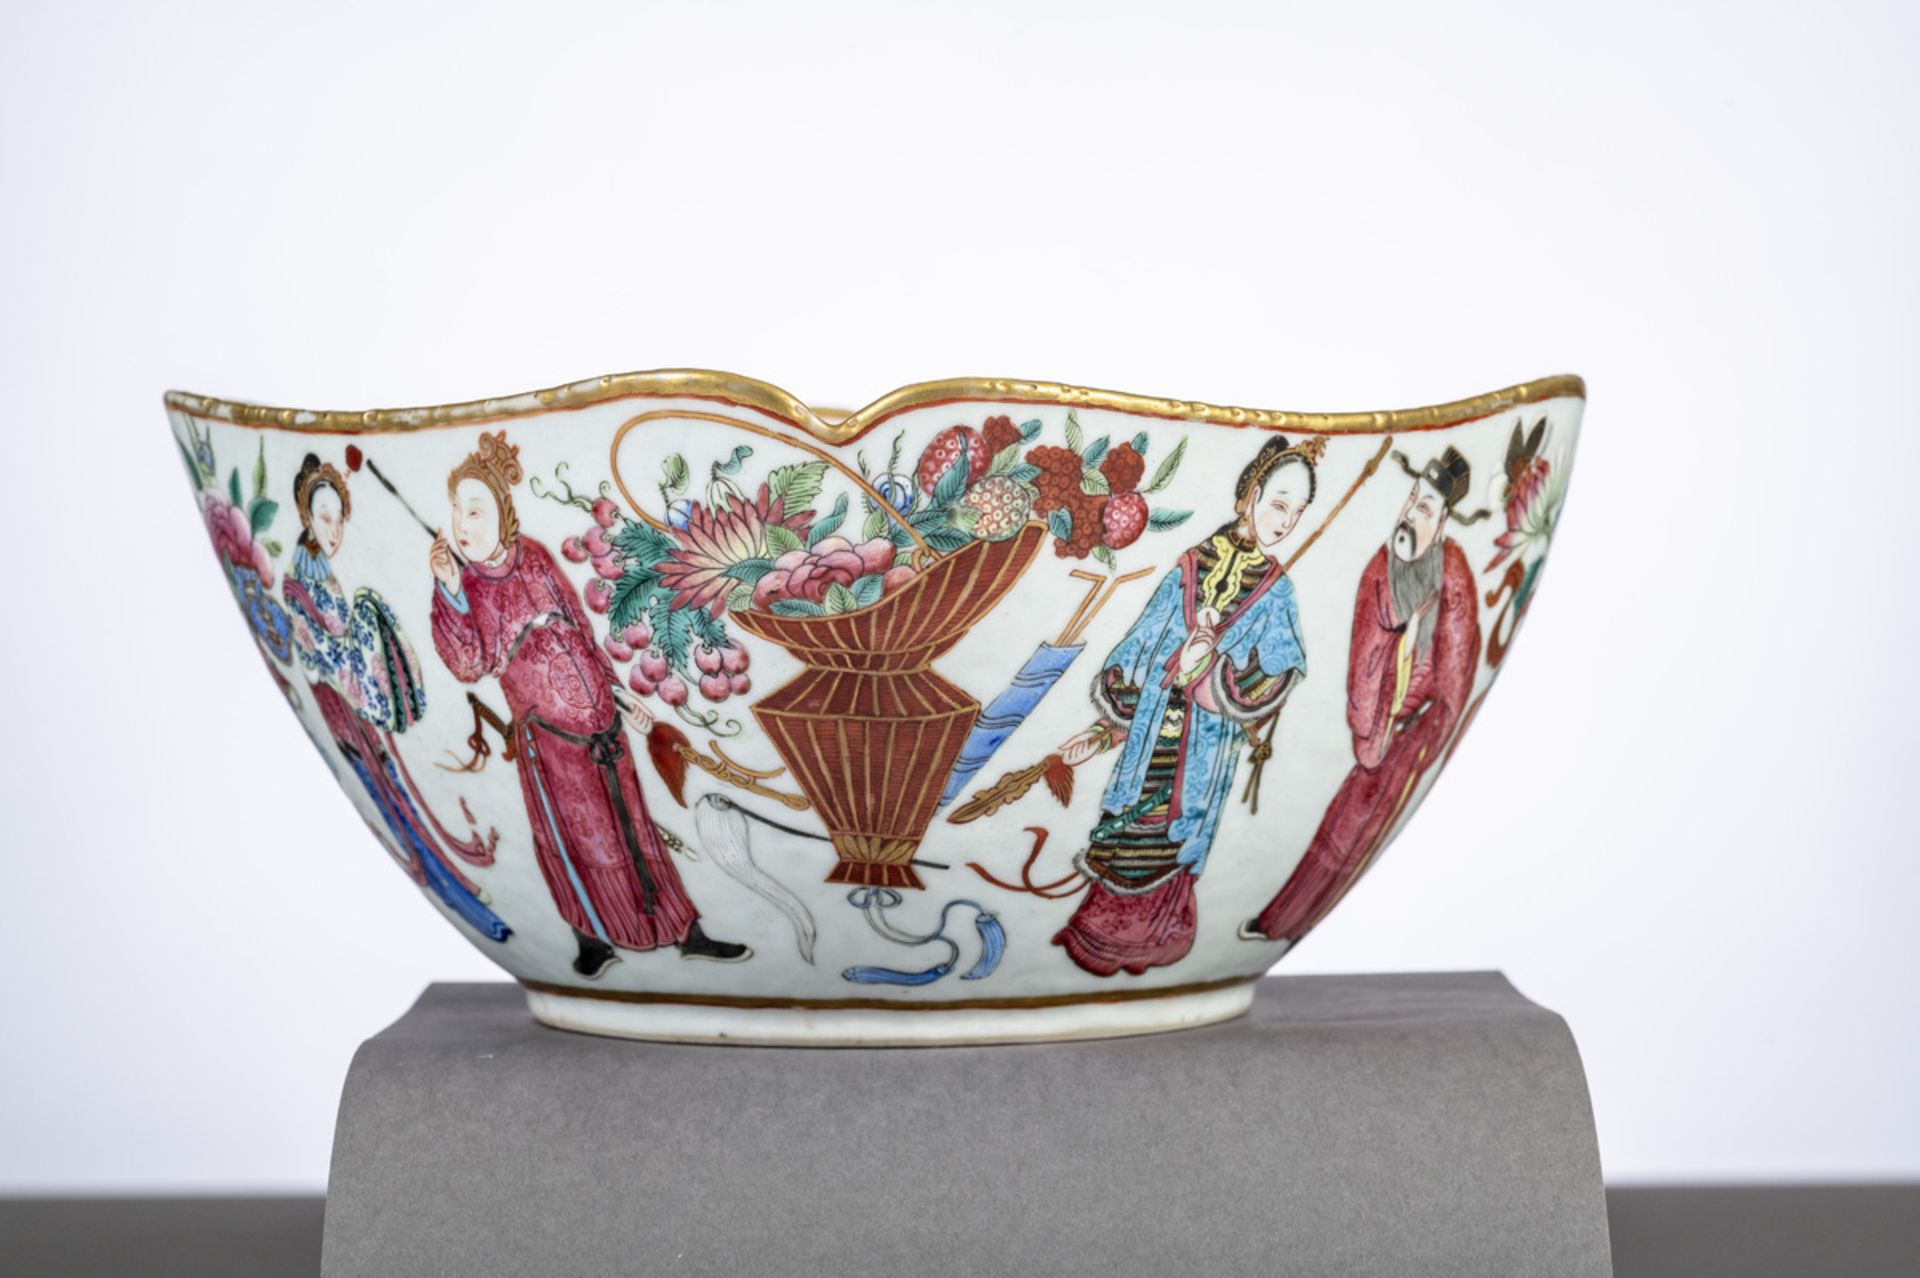 Lobed bowl in Chinese famille rose porcelain with gold rims 'characters', 19th century (11x24x24cm) - Image 3 of 5